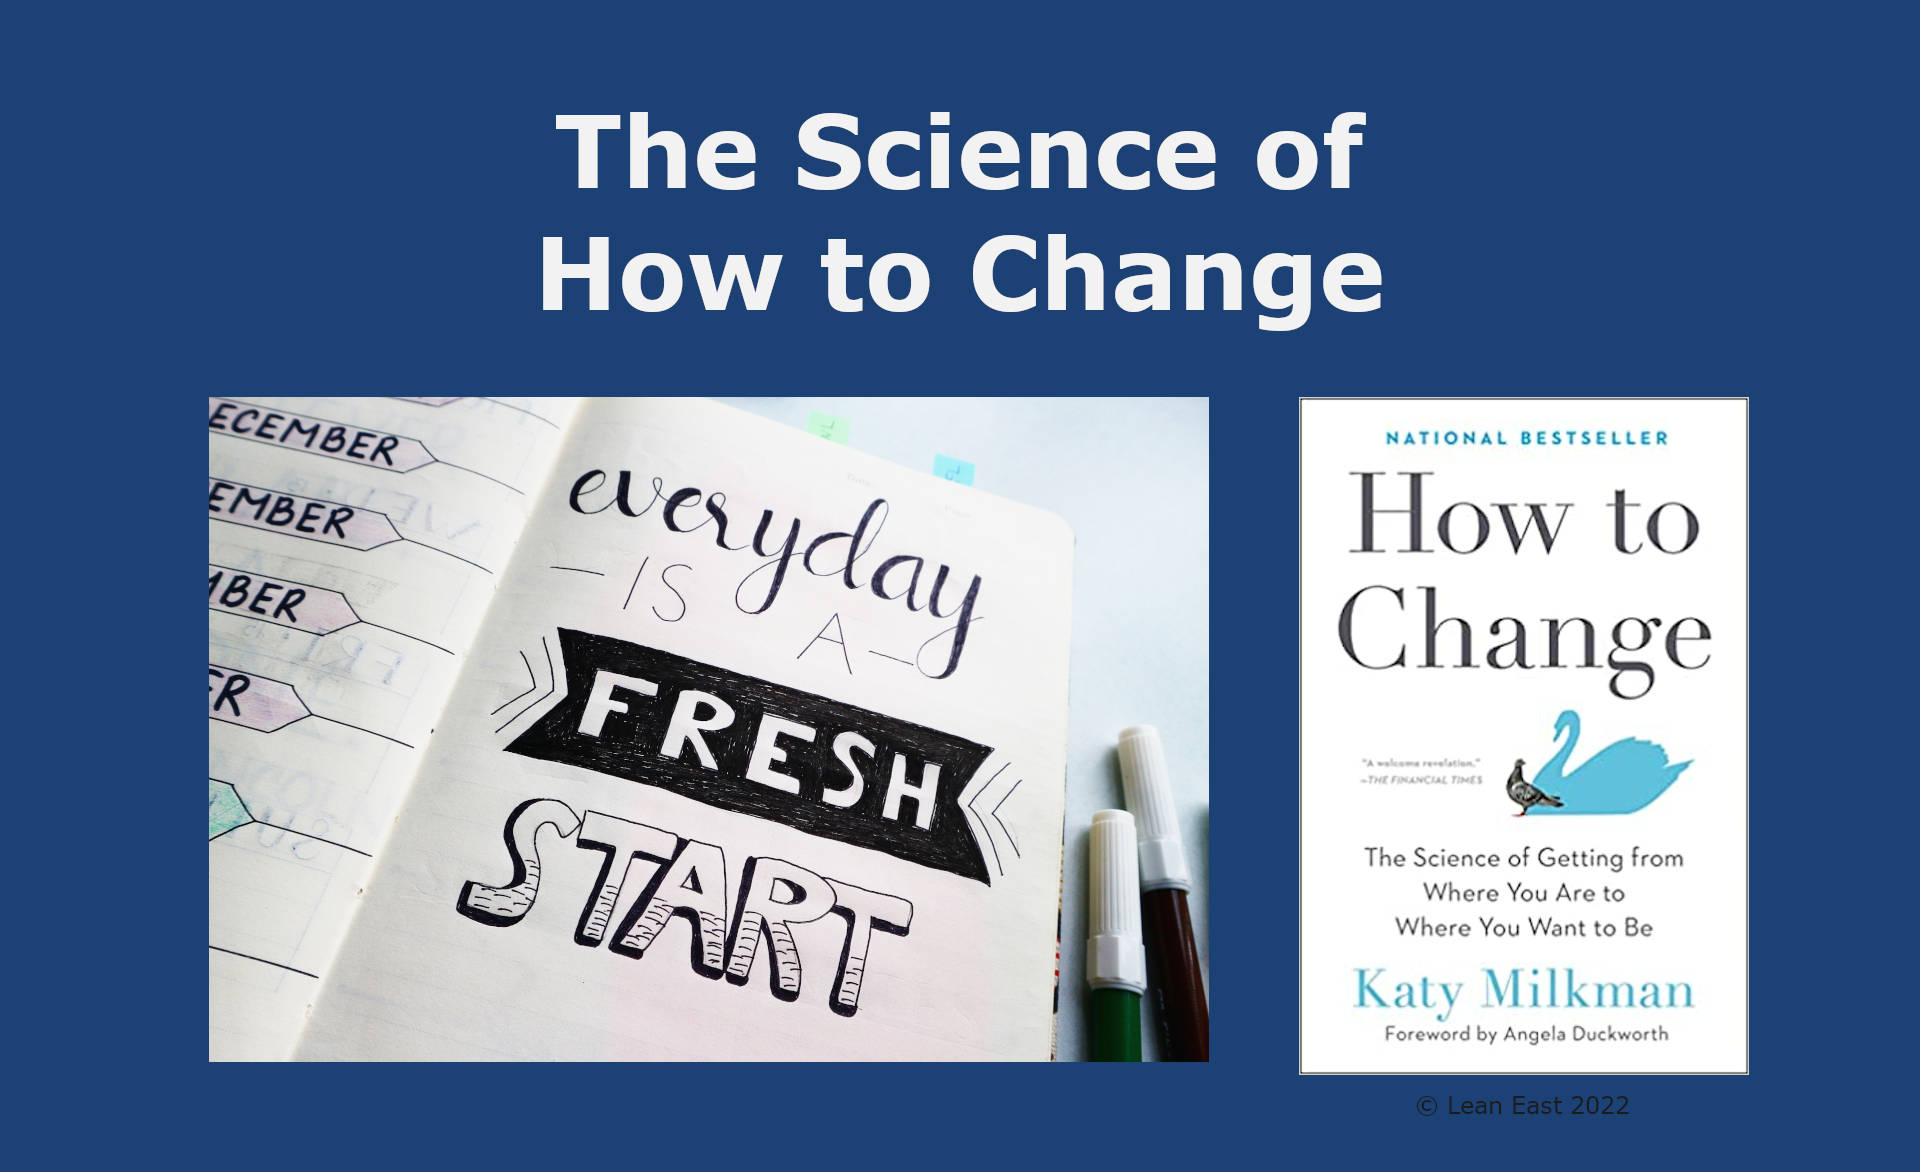 The Science of How to Change